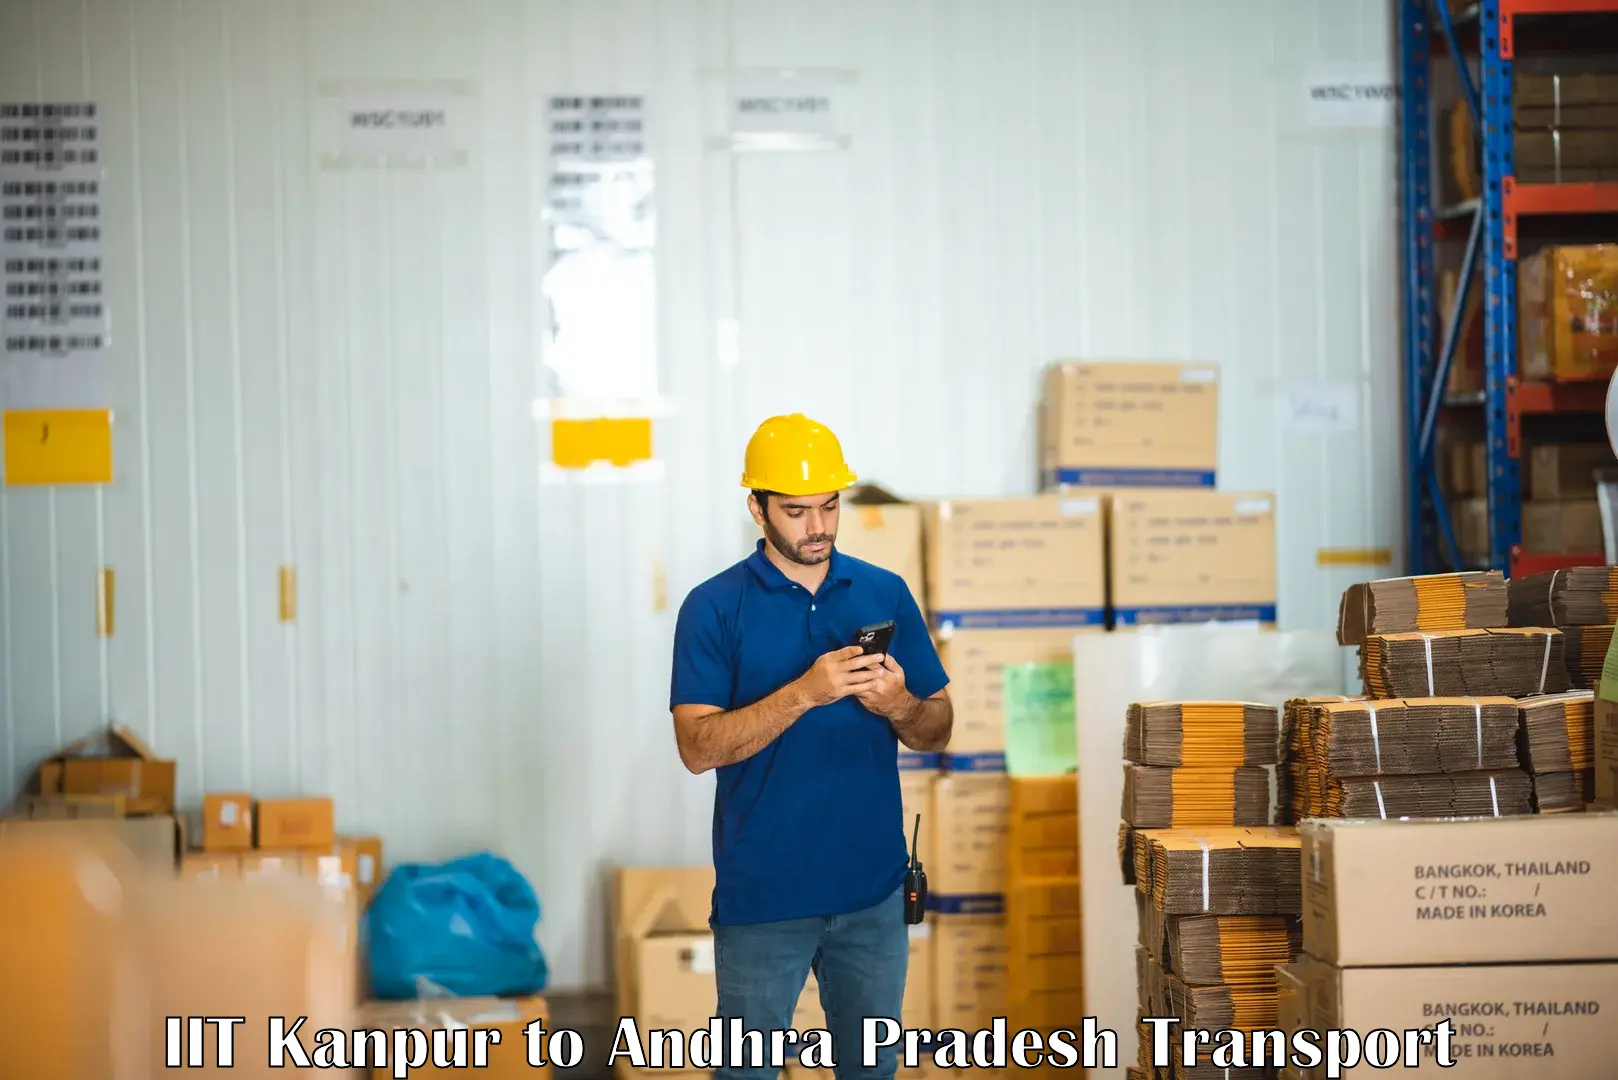 Container transport service IIT Kanpur to Kudair